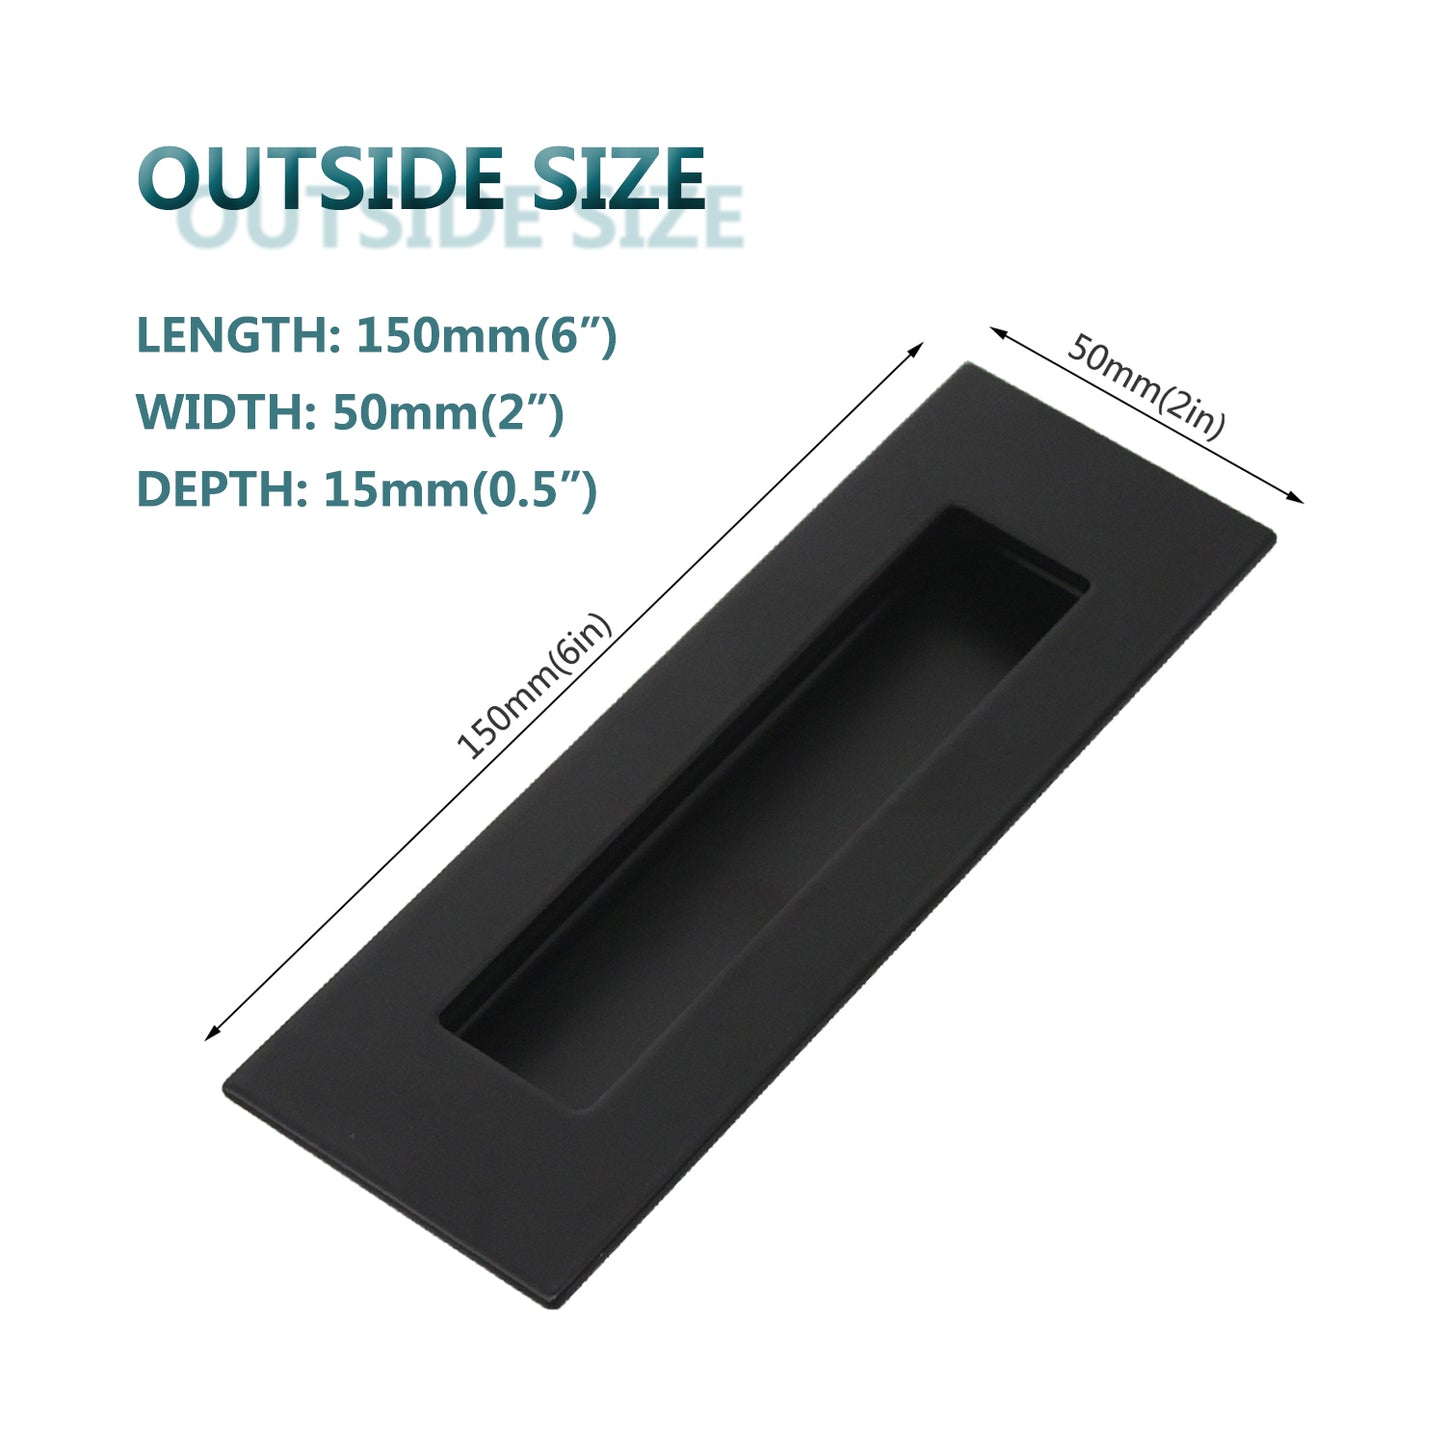 Rectangle Flush Pull Handle for Sliding Doors, Cabinets, Closet and Drawers, Black Stainless Steel Recessed Finger Pull - 6"*2'' and 4.72"*1.57" - MH018BK